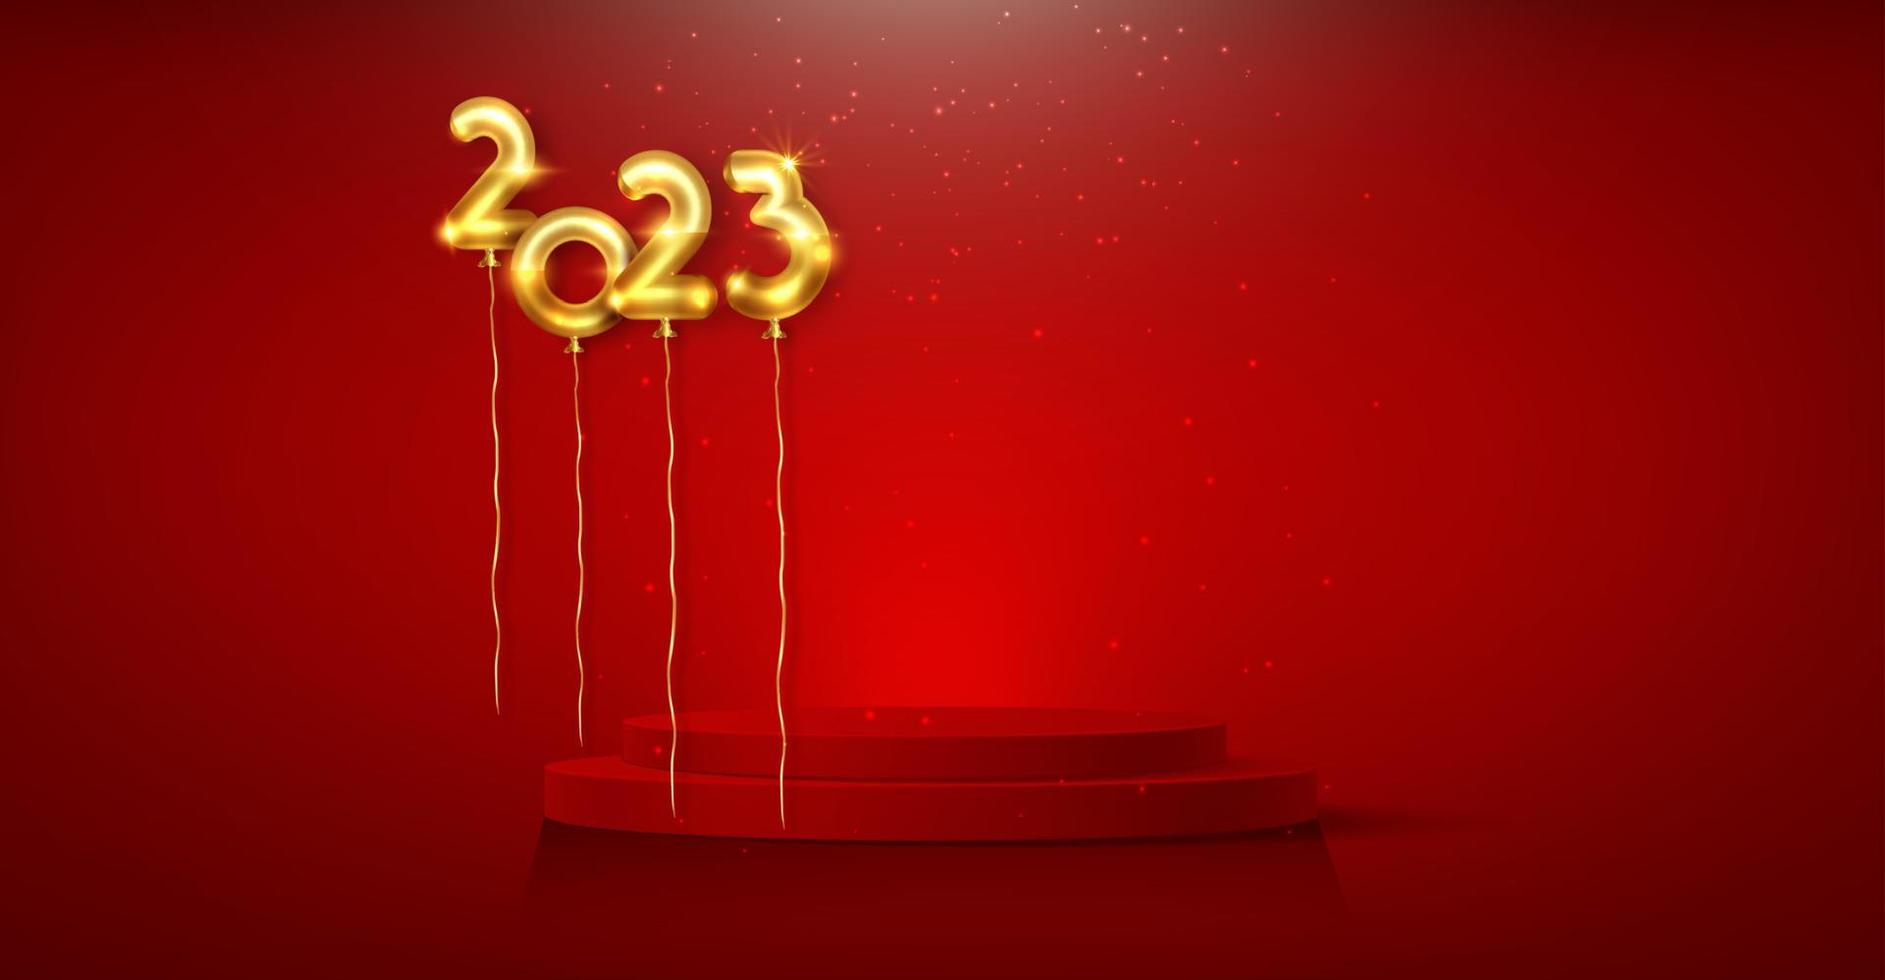 3D golden ballon 2023 with podium banner, New Year party, gold foil numerals, product display cylindrical shape, festive platform for the holidays. Vector luxury template isolated on red background